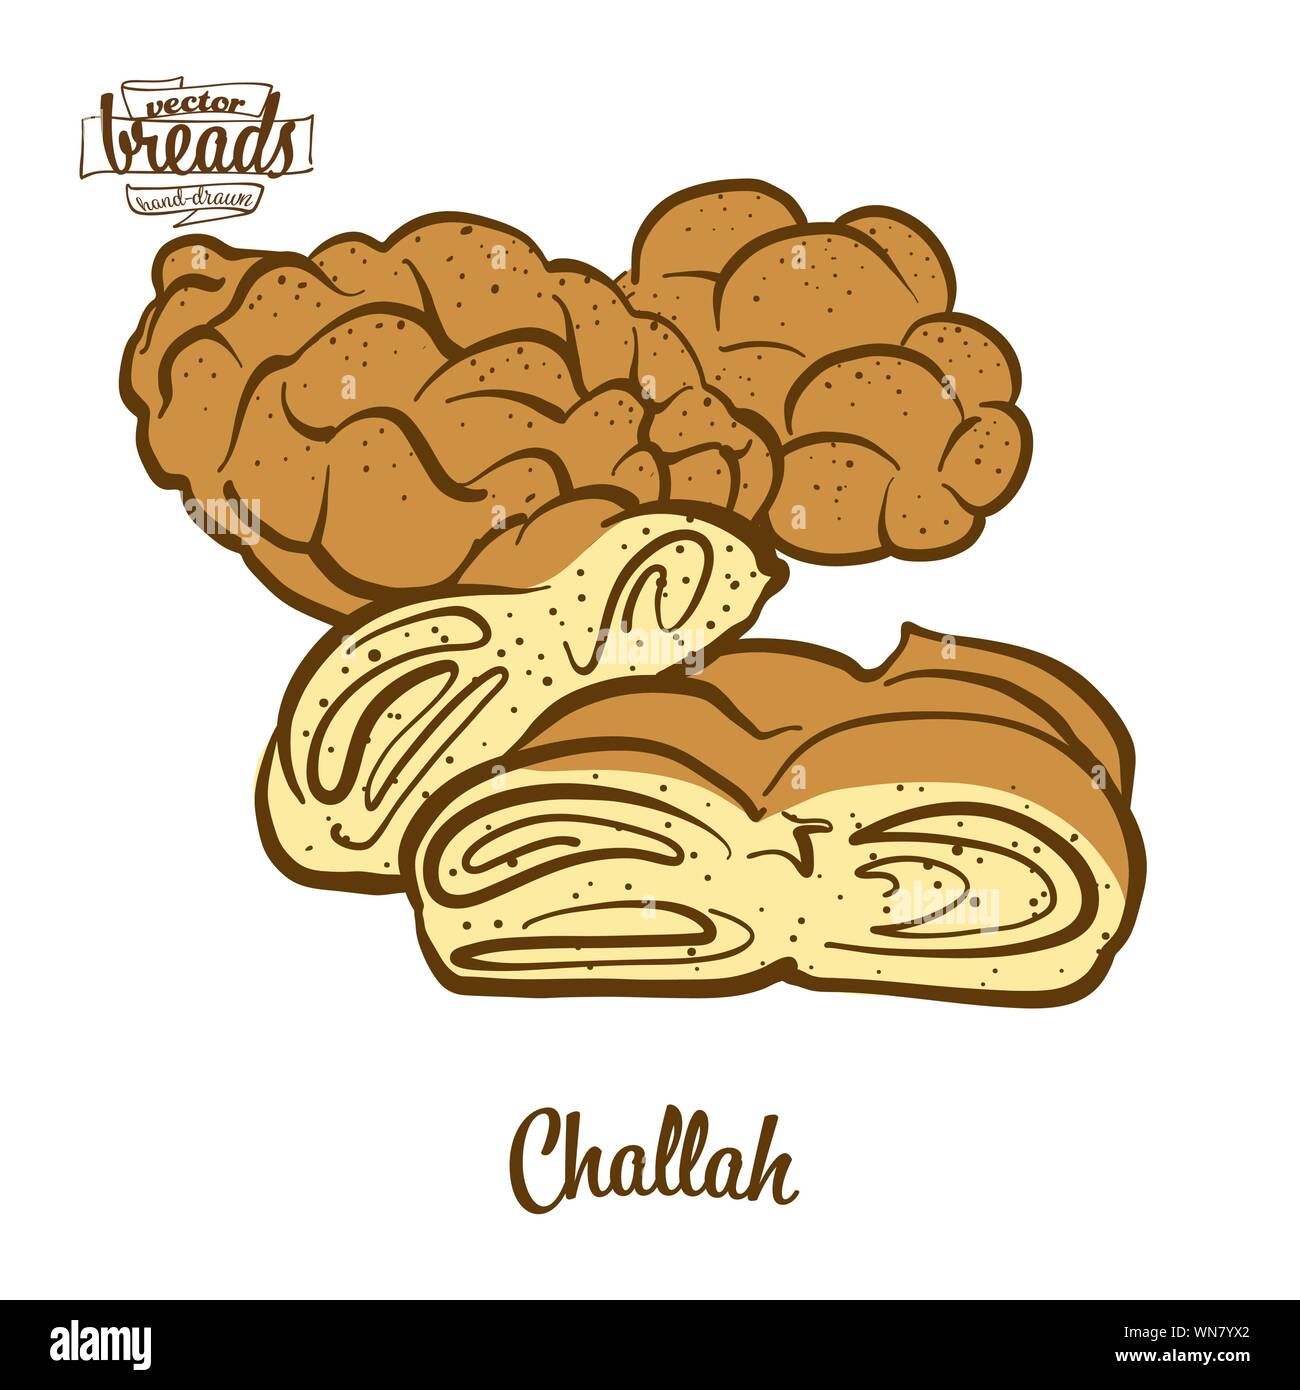 Colored drawing of Challah bread. Vector illustration of Leavened food, usually known in Poland and Israel. Colored Bread sketches. Stock Vector